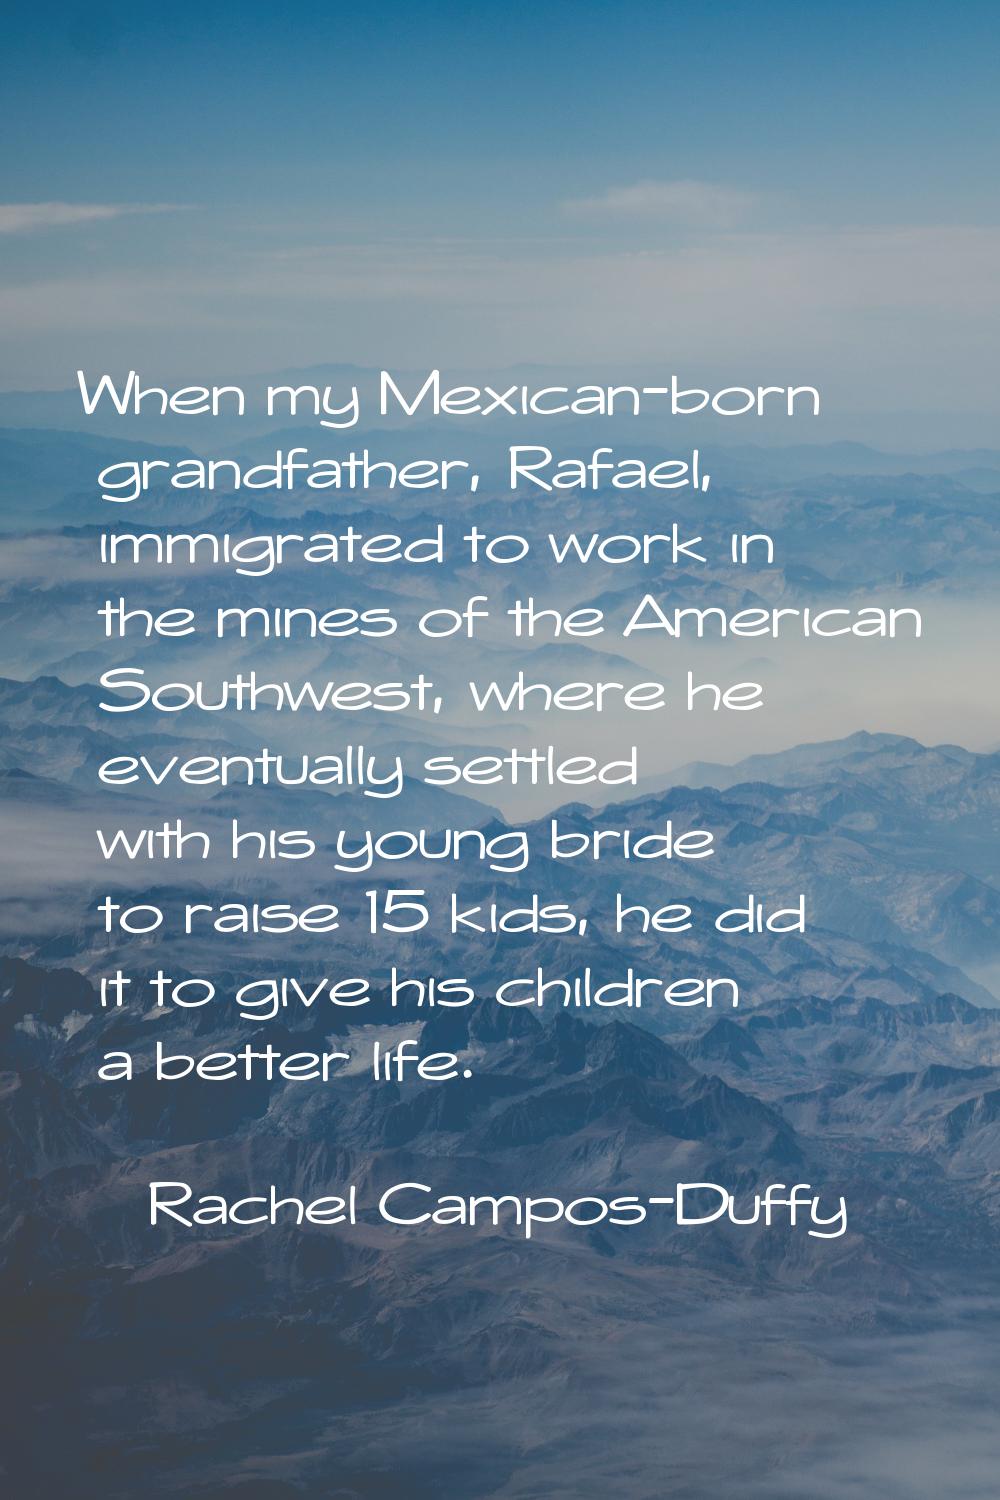 When my Mexican-born grandfather, Rafael, immigrated to work in the mines of the American Southwest